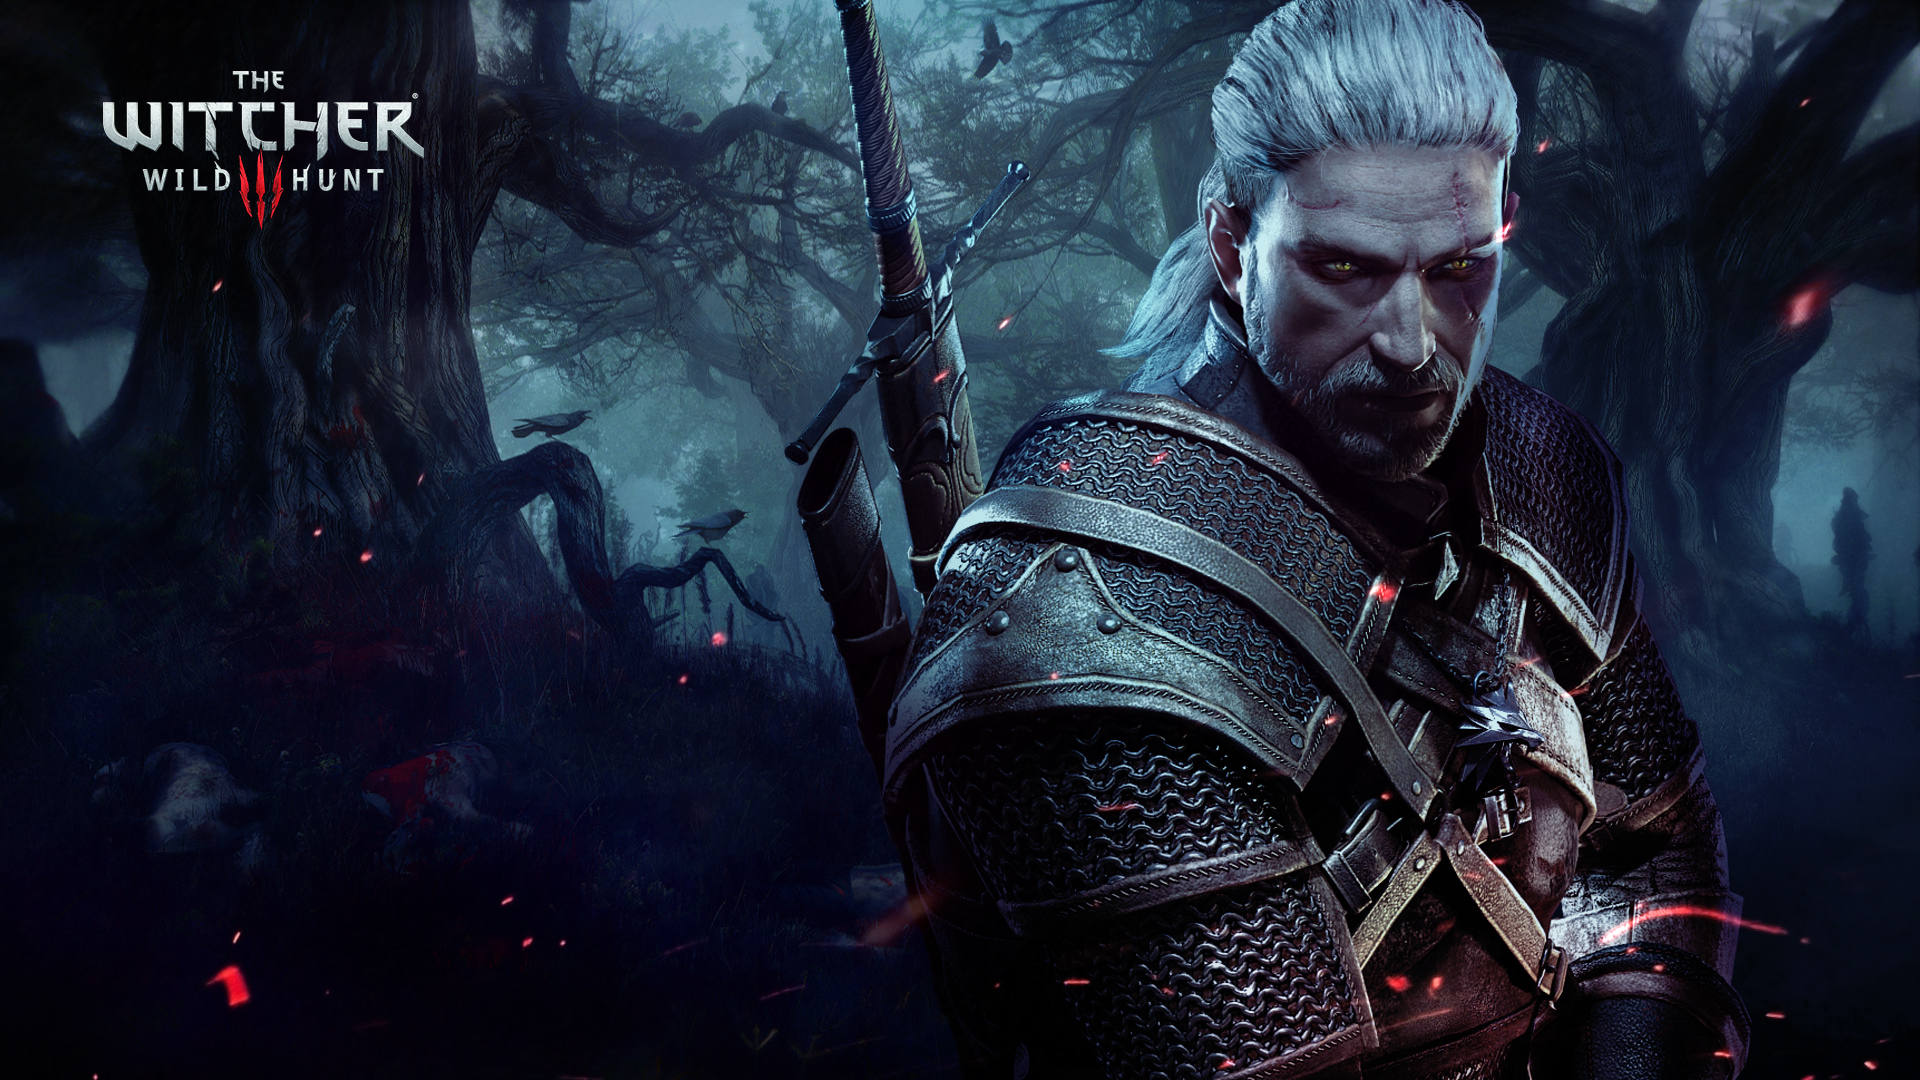 The Witcher 3 Wallpapers 1 2 1920x1080